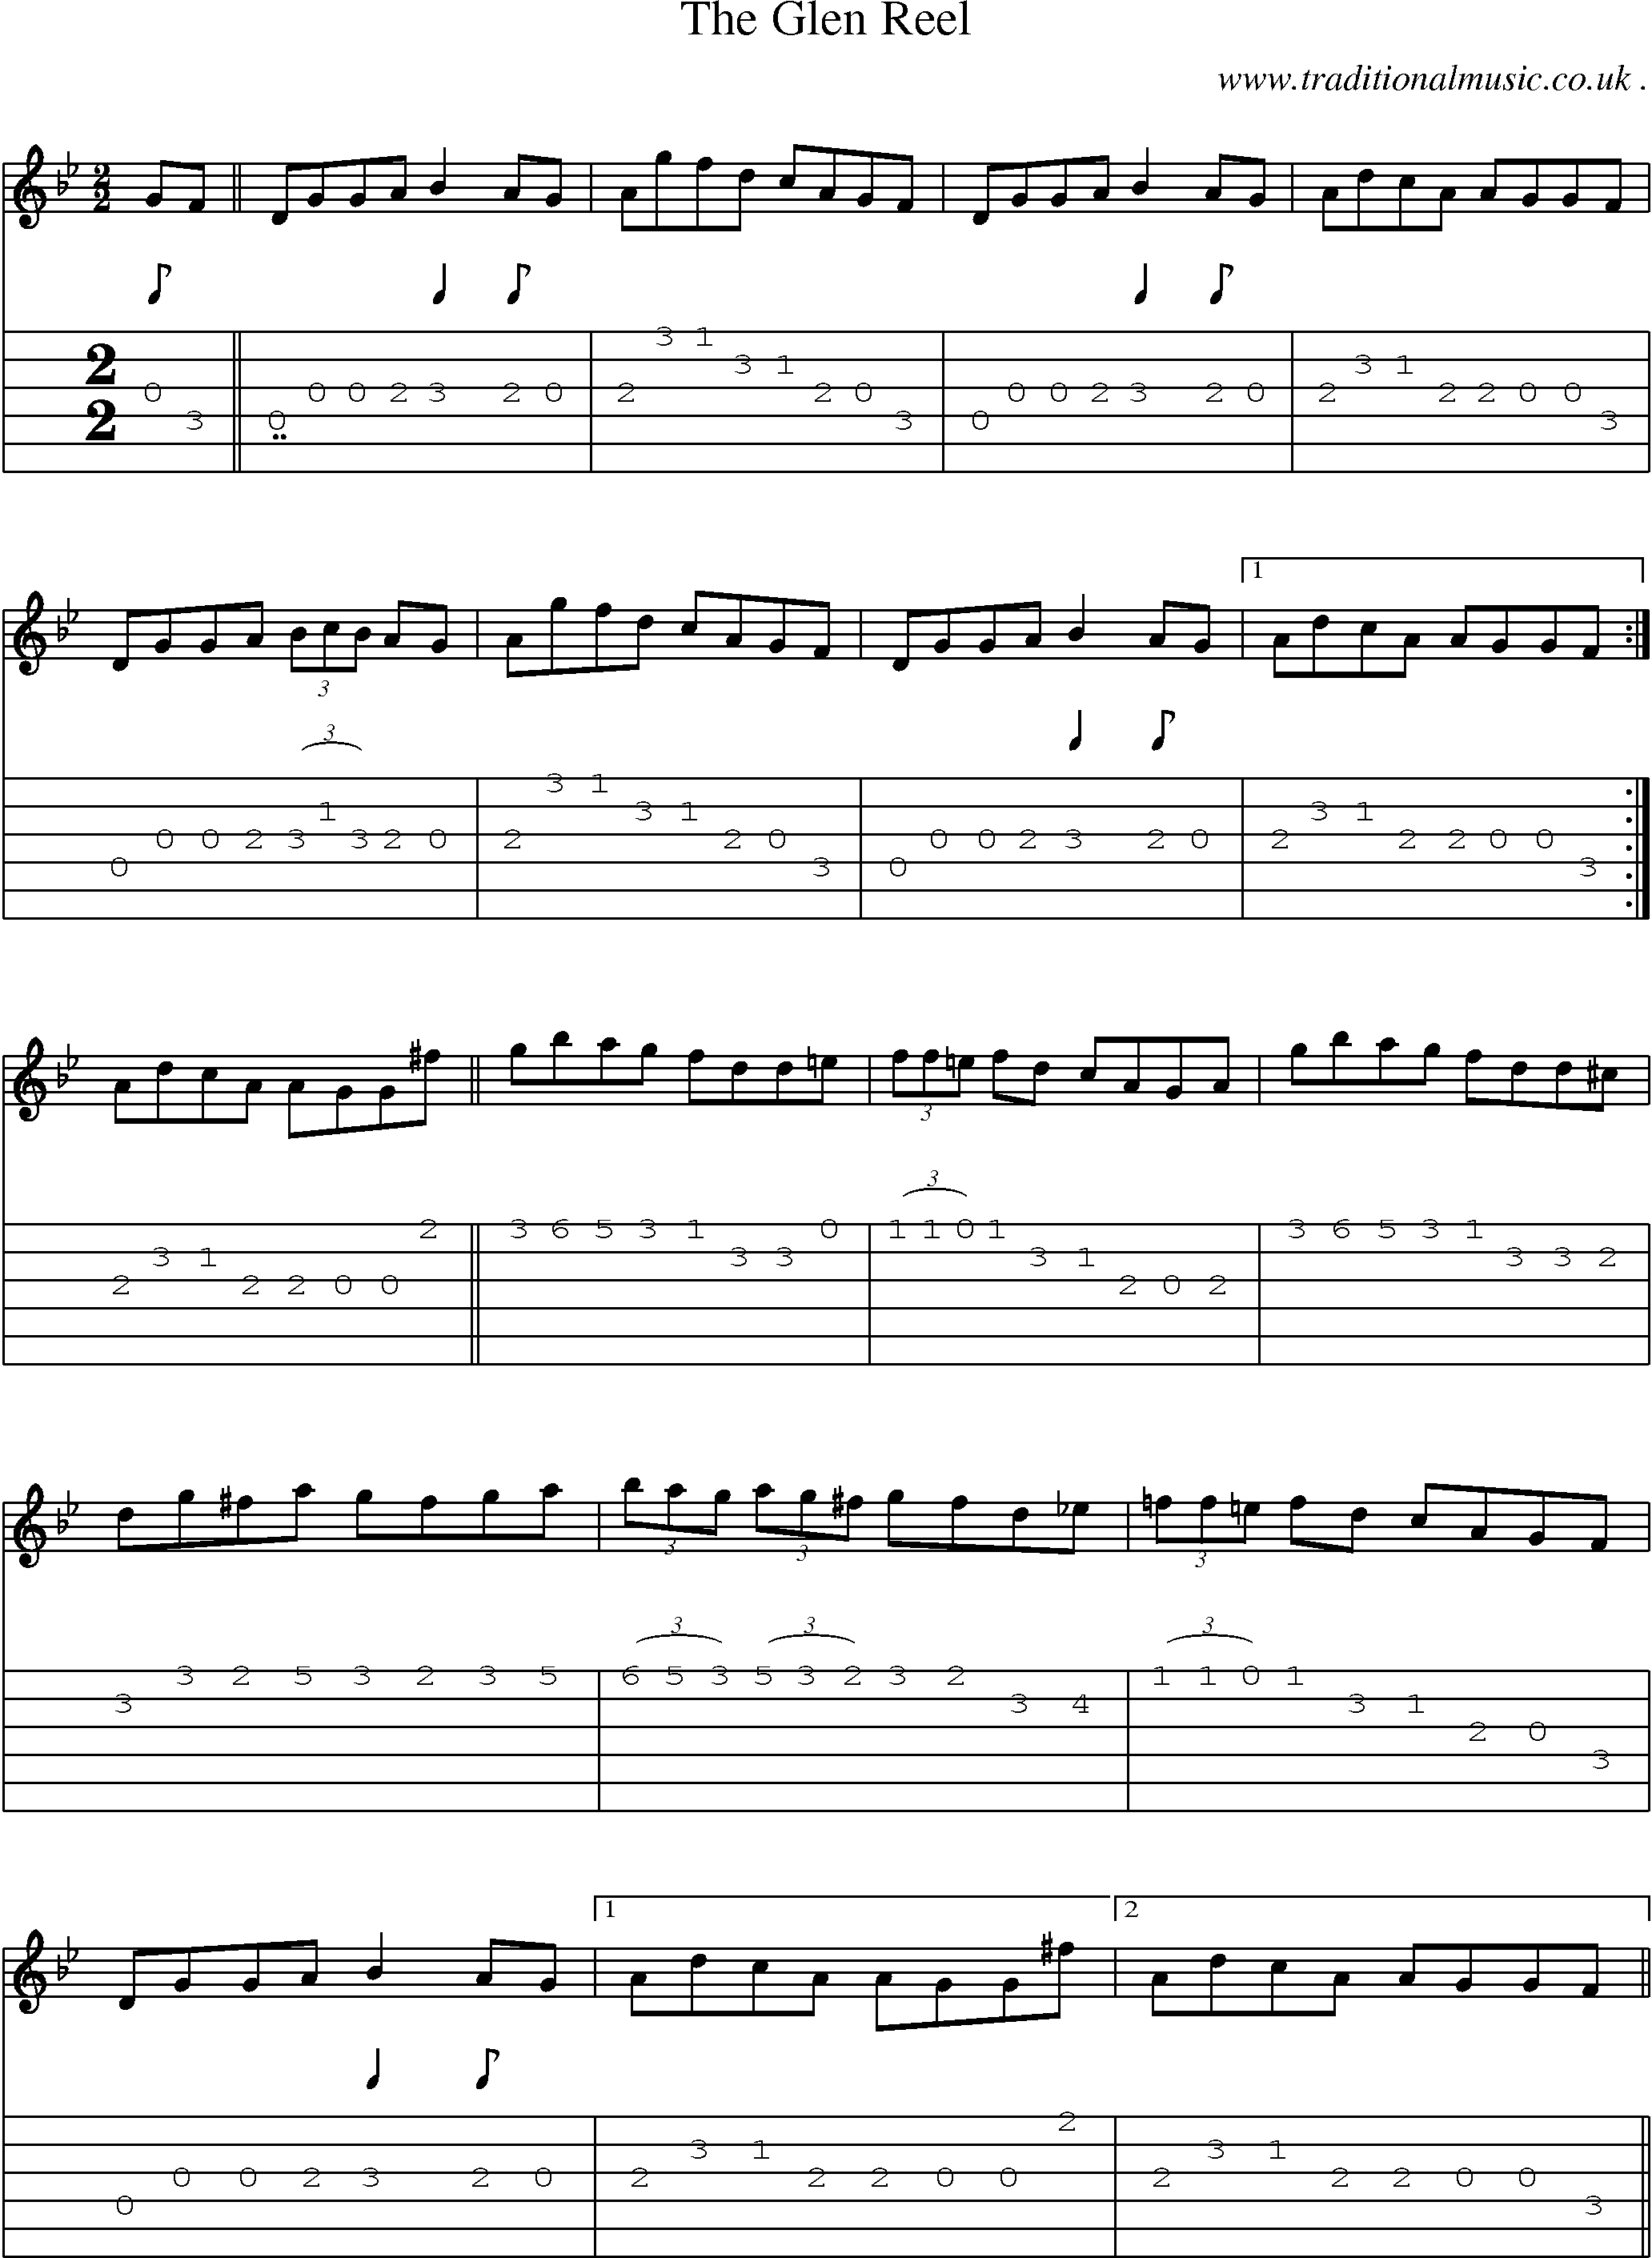 Sheet-Music and Guitar Tabs for The Glen Reel